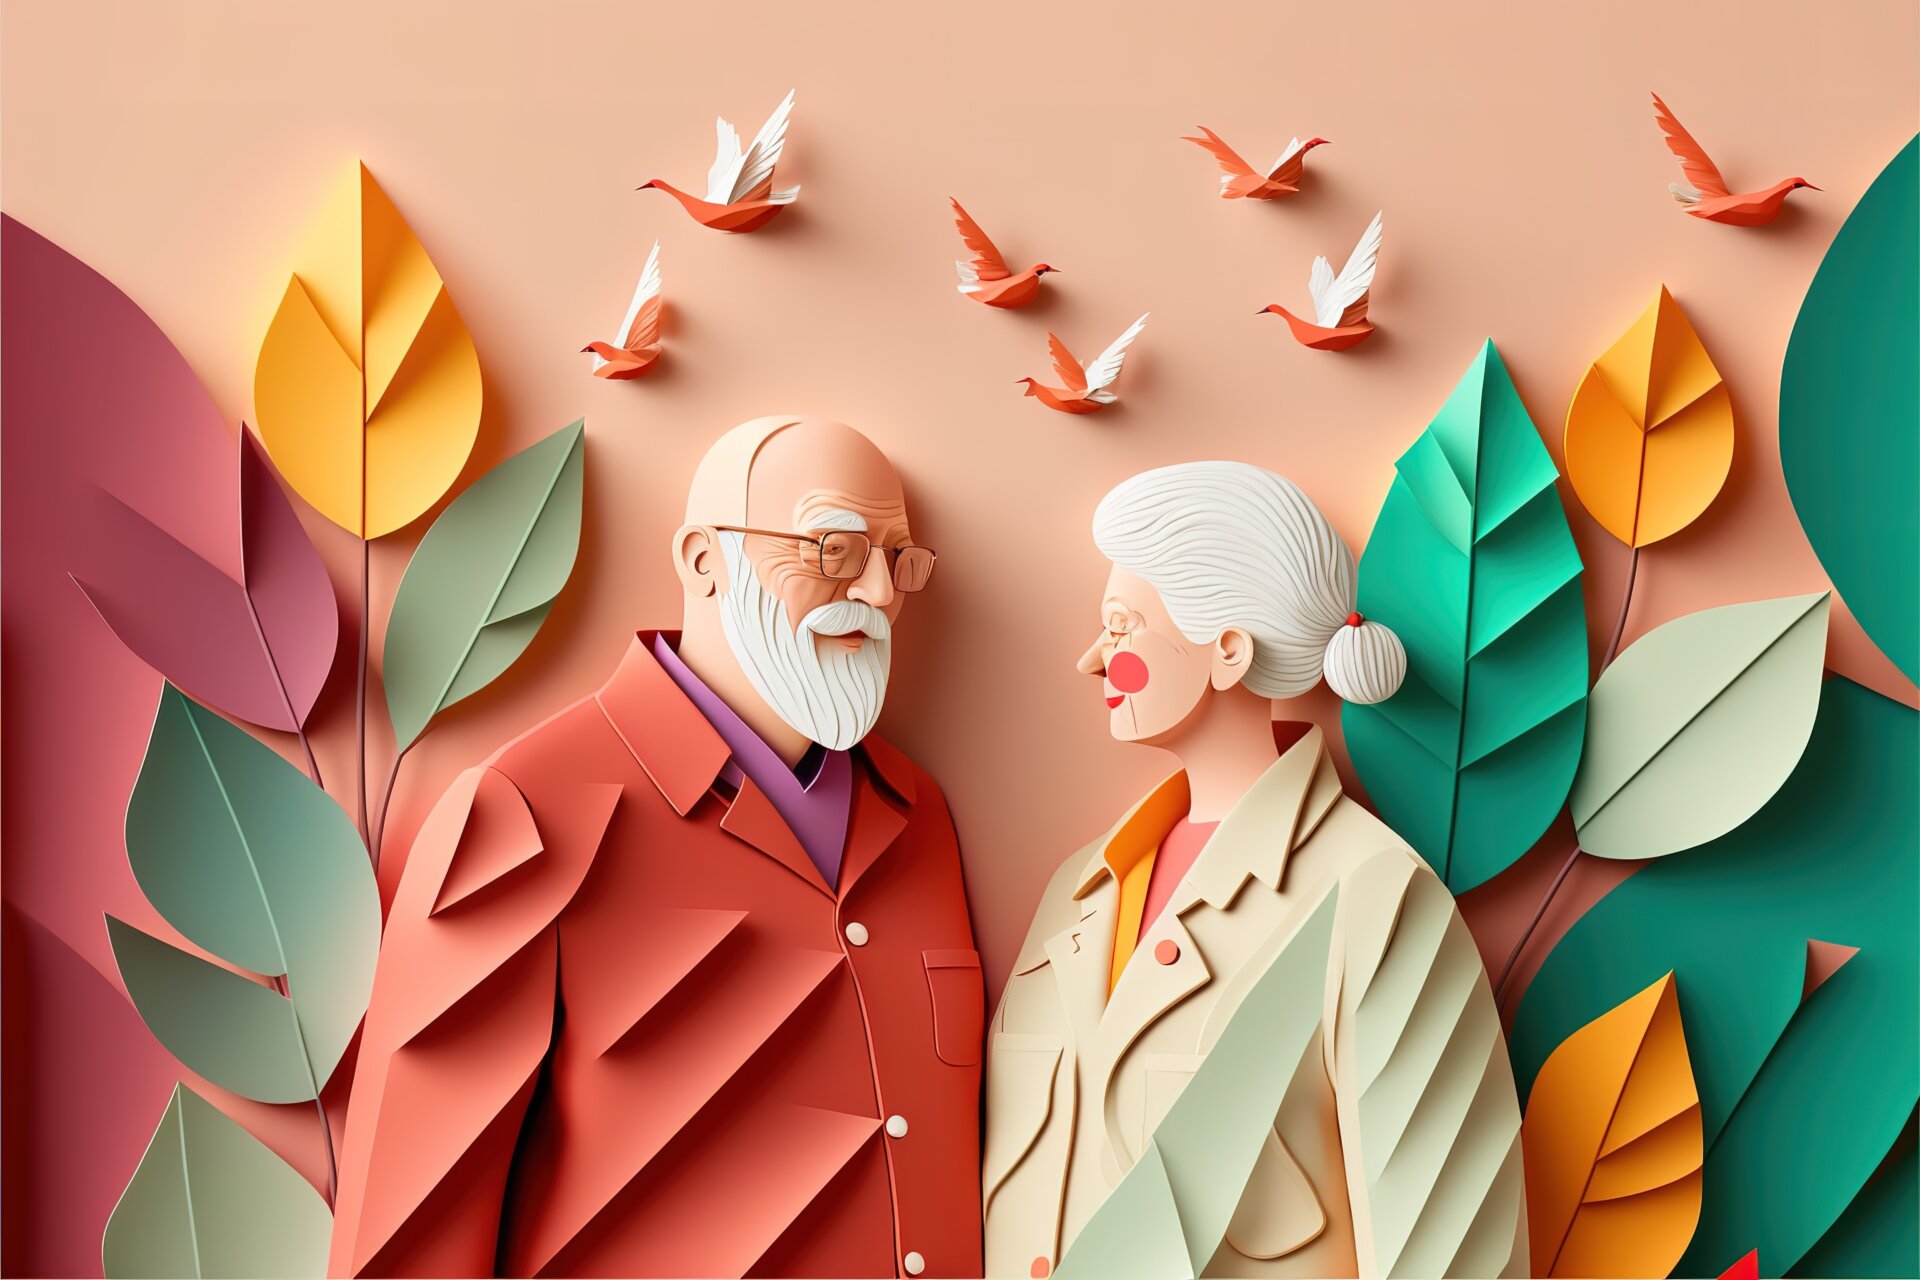 Illustration of two elderly people made out of origami, smiling at each other